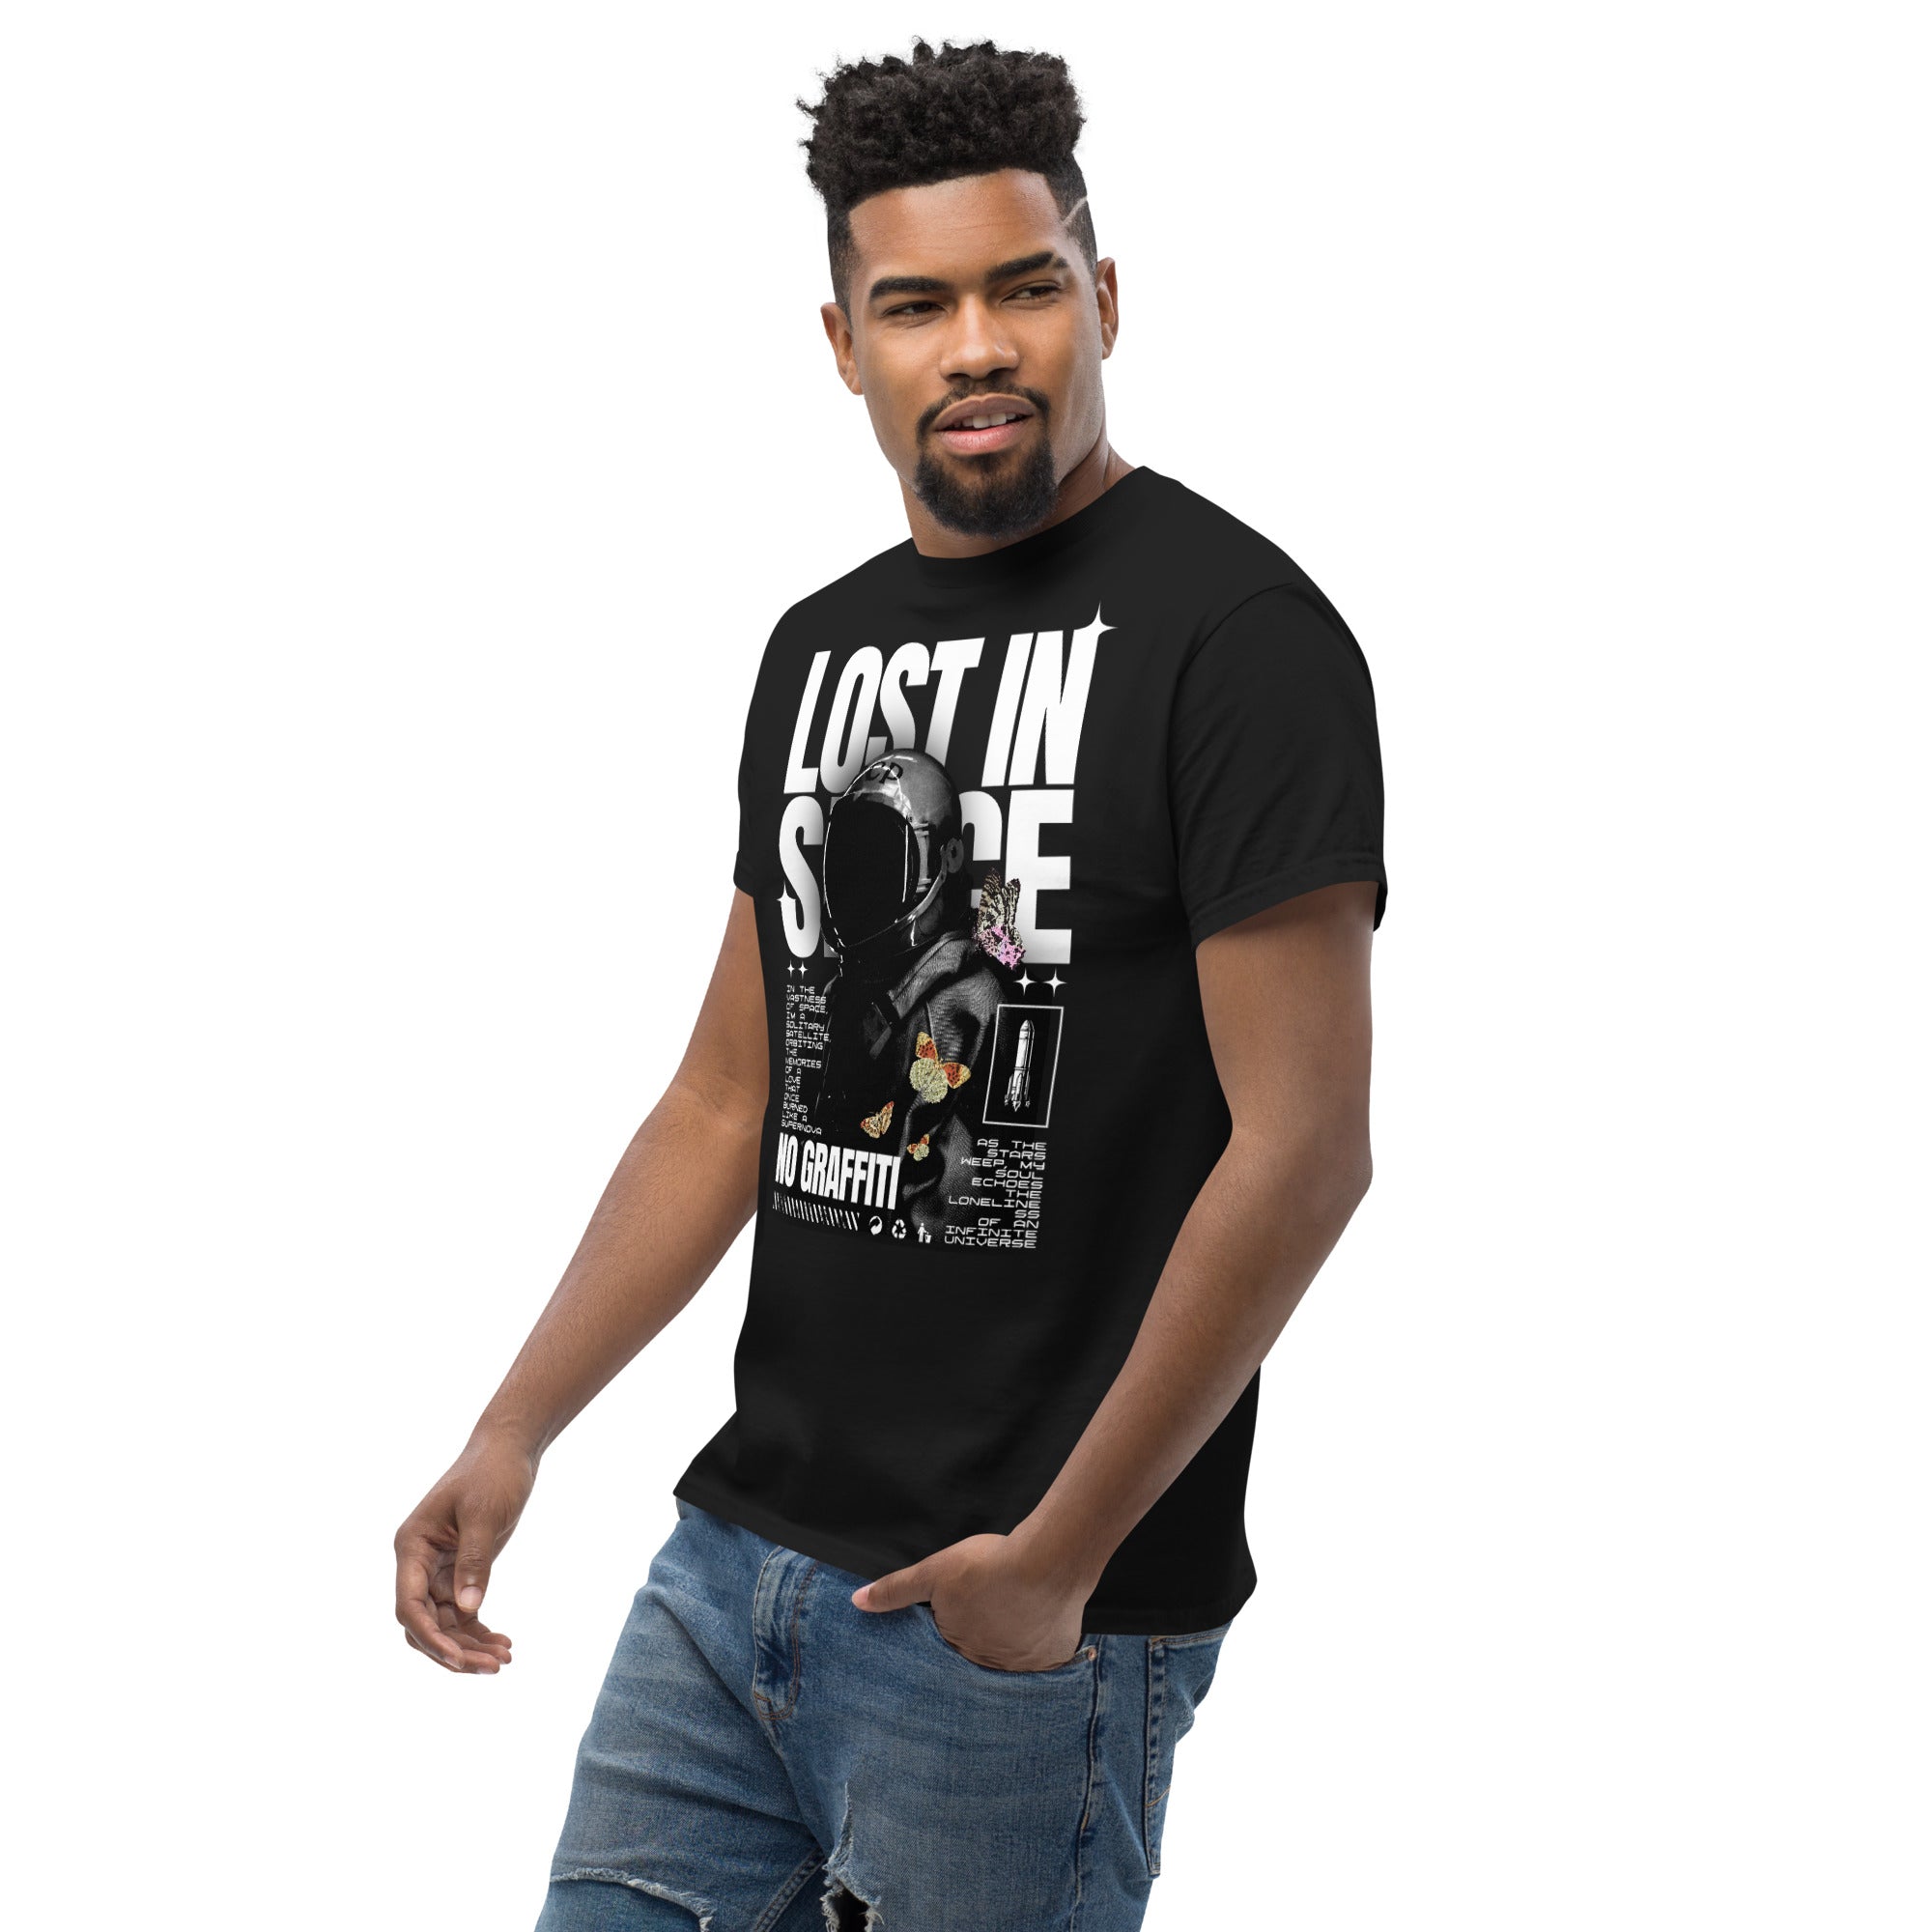 Lost in Space Men's classic tee